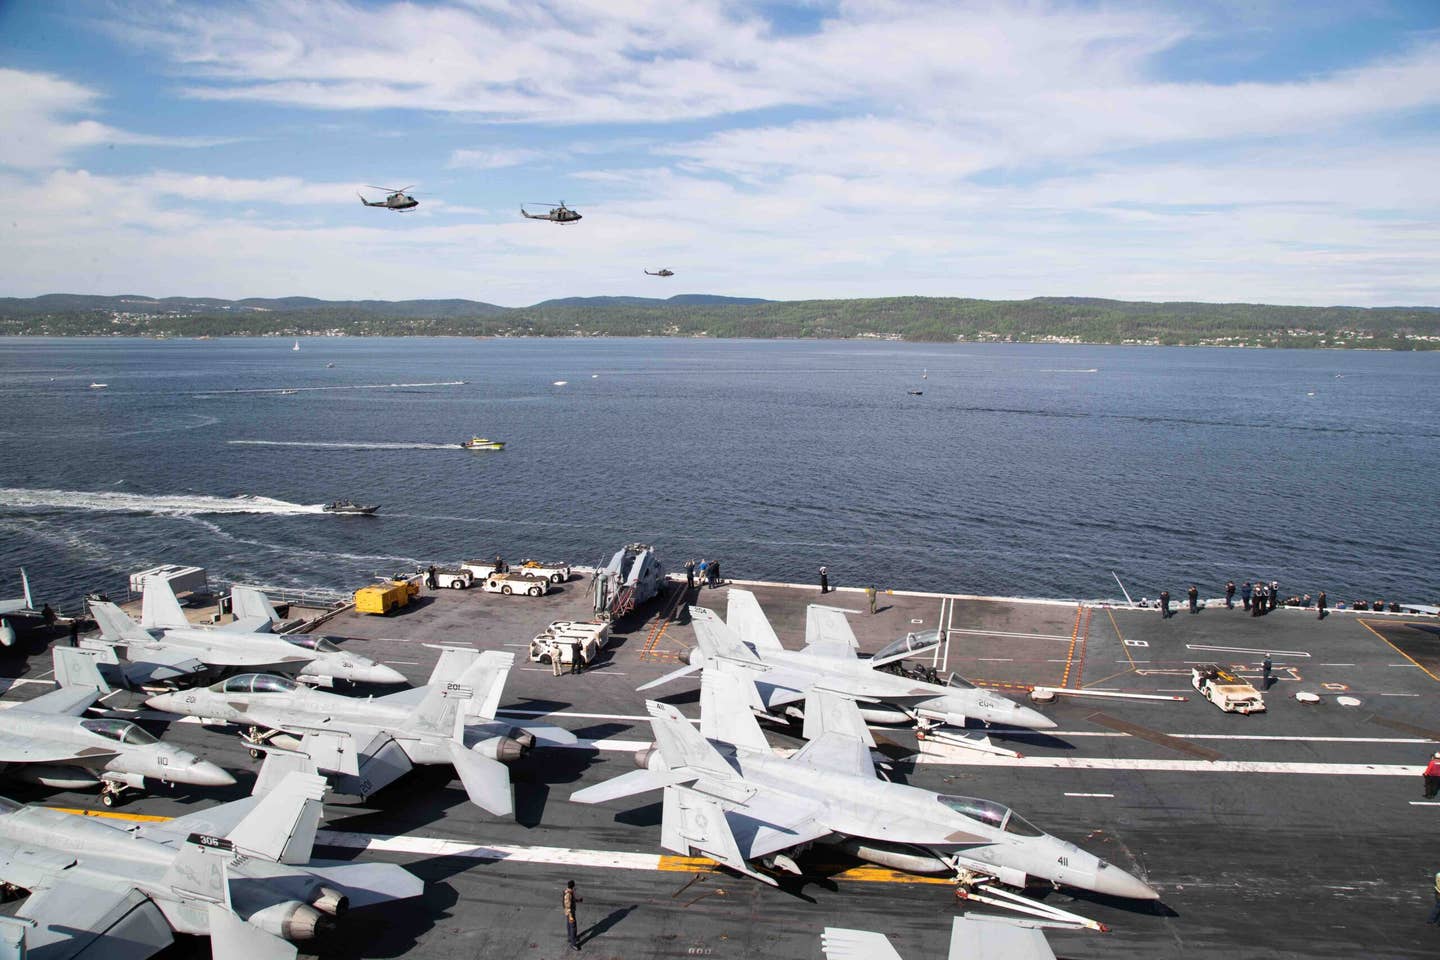 Three Norwegian military helicopters perform a fly-by of the flagship USS <em>Gerald R. Ford </em>(CVN 78) as the ship transits the Oslo fjord for its first port call in Oslo, Norway, May 24, 2023. <em>U.S. Navy Photo by Mass Communication Specialist 2nd Class Brian Glunt</em>